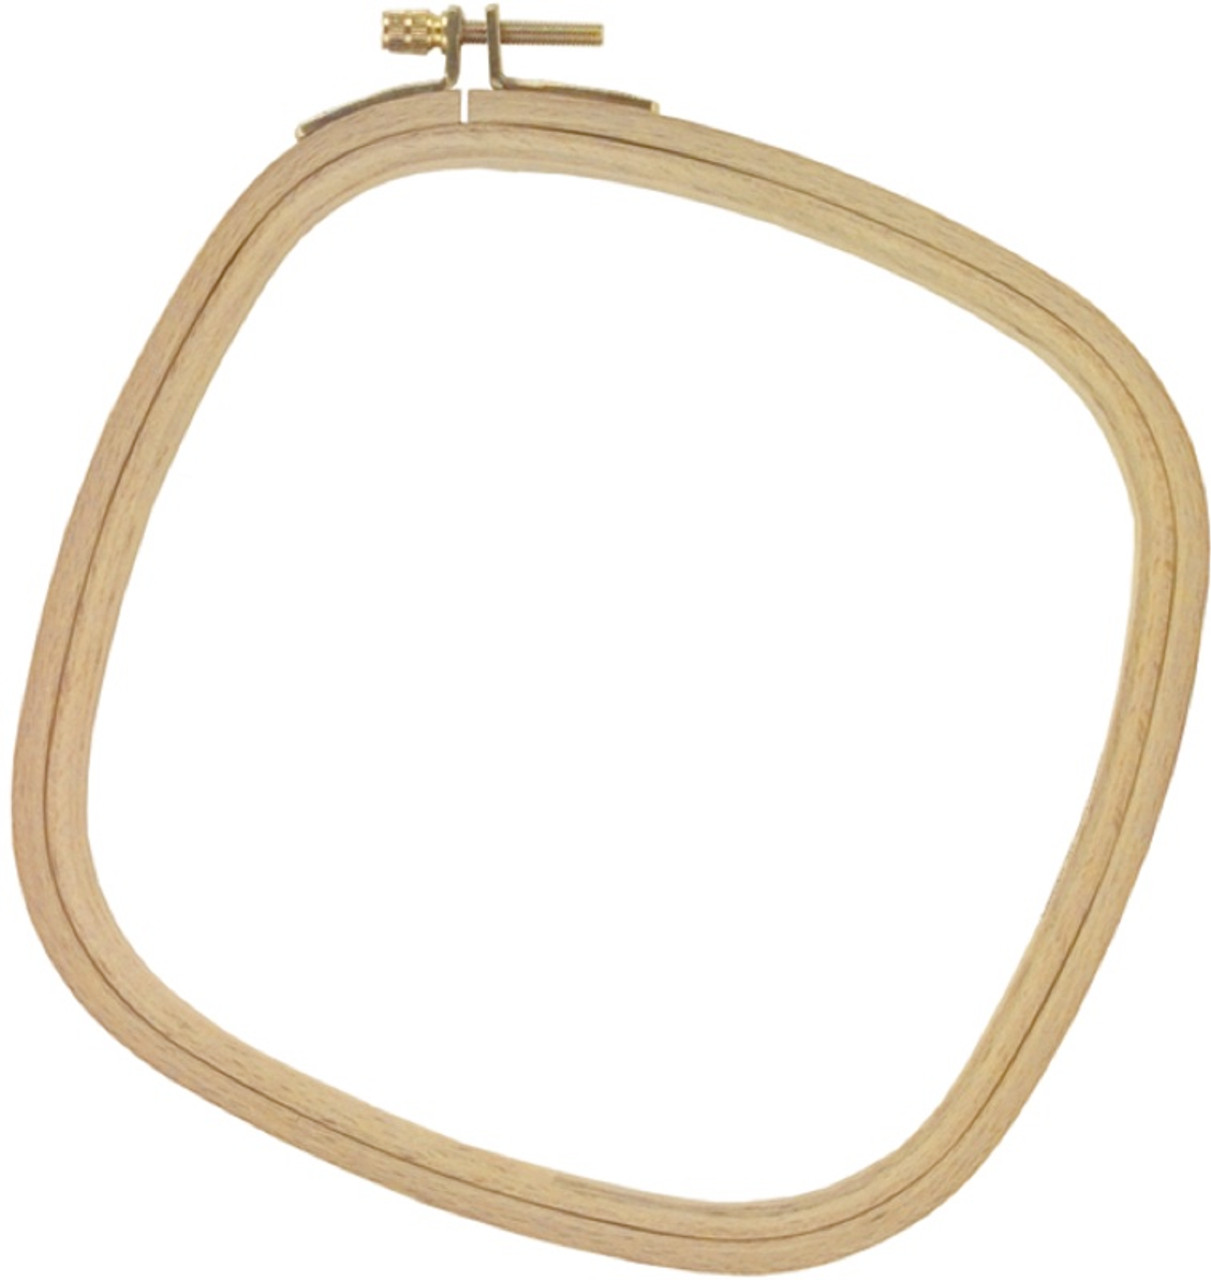 Buy the Edmunds - Wood Embroidery Hoop 6 - (202-1515) 715627102159 on SALE  at www.